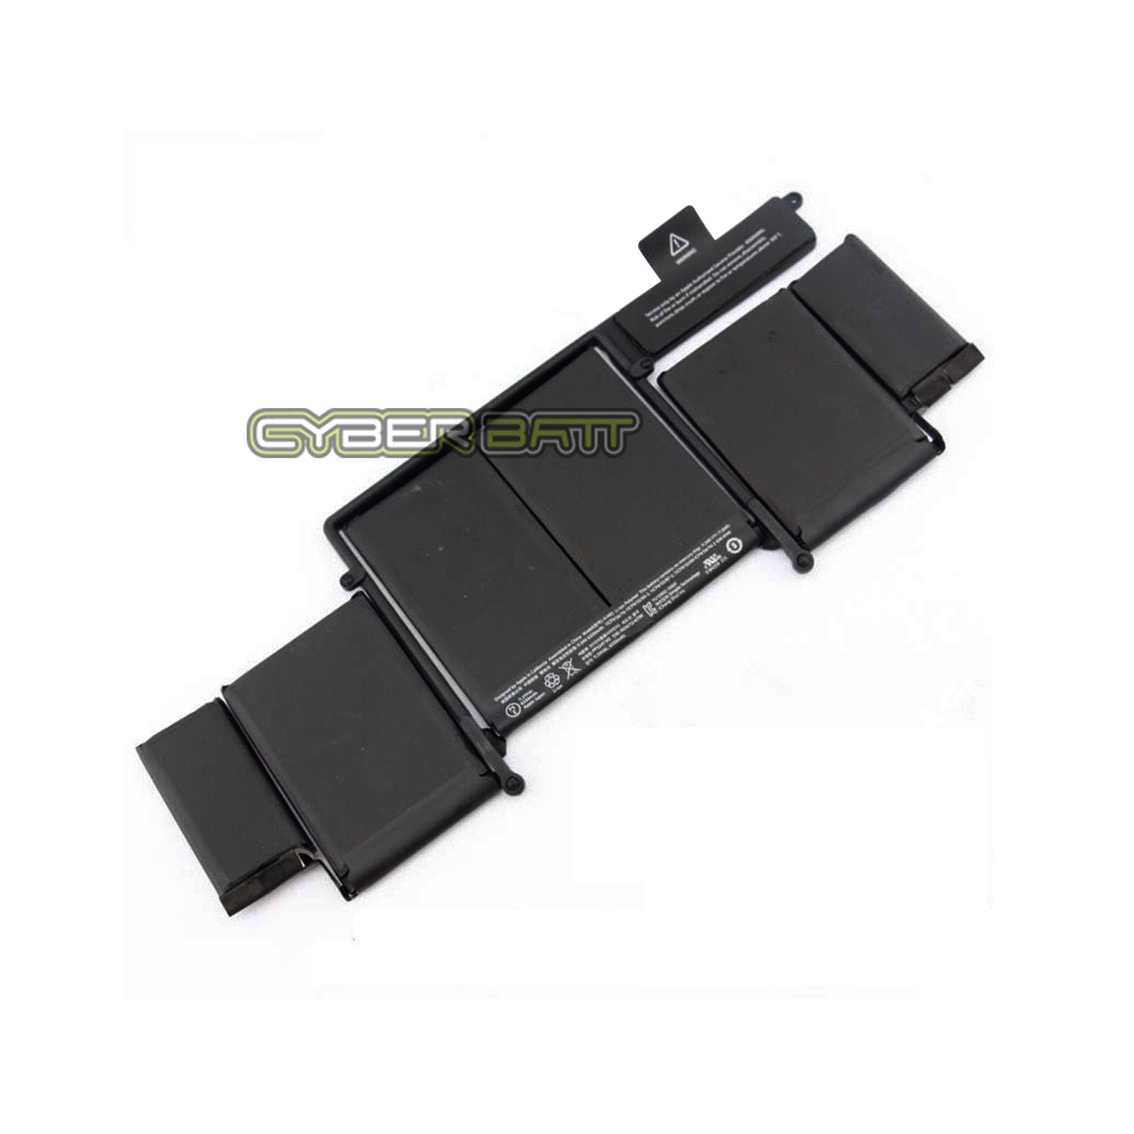 Battery MacBook A1493 For MacBook Pro Retina 13 inch A1502 (Late 2013 -Mid 2014) Black 11.34V/71.8Wh (OEM)